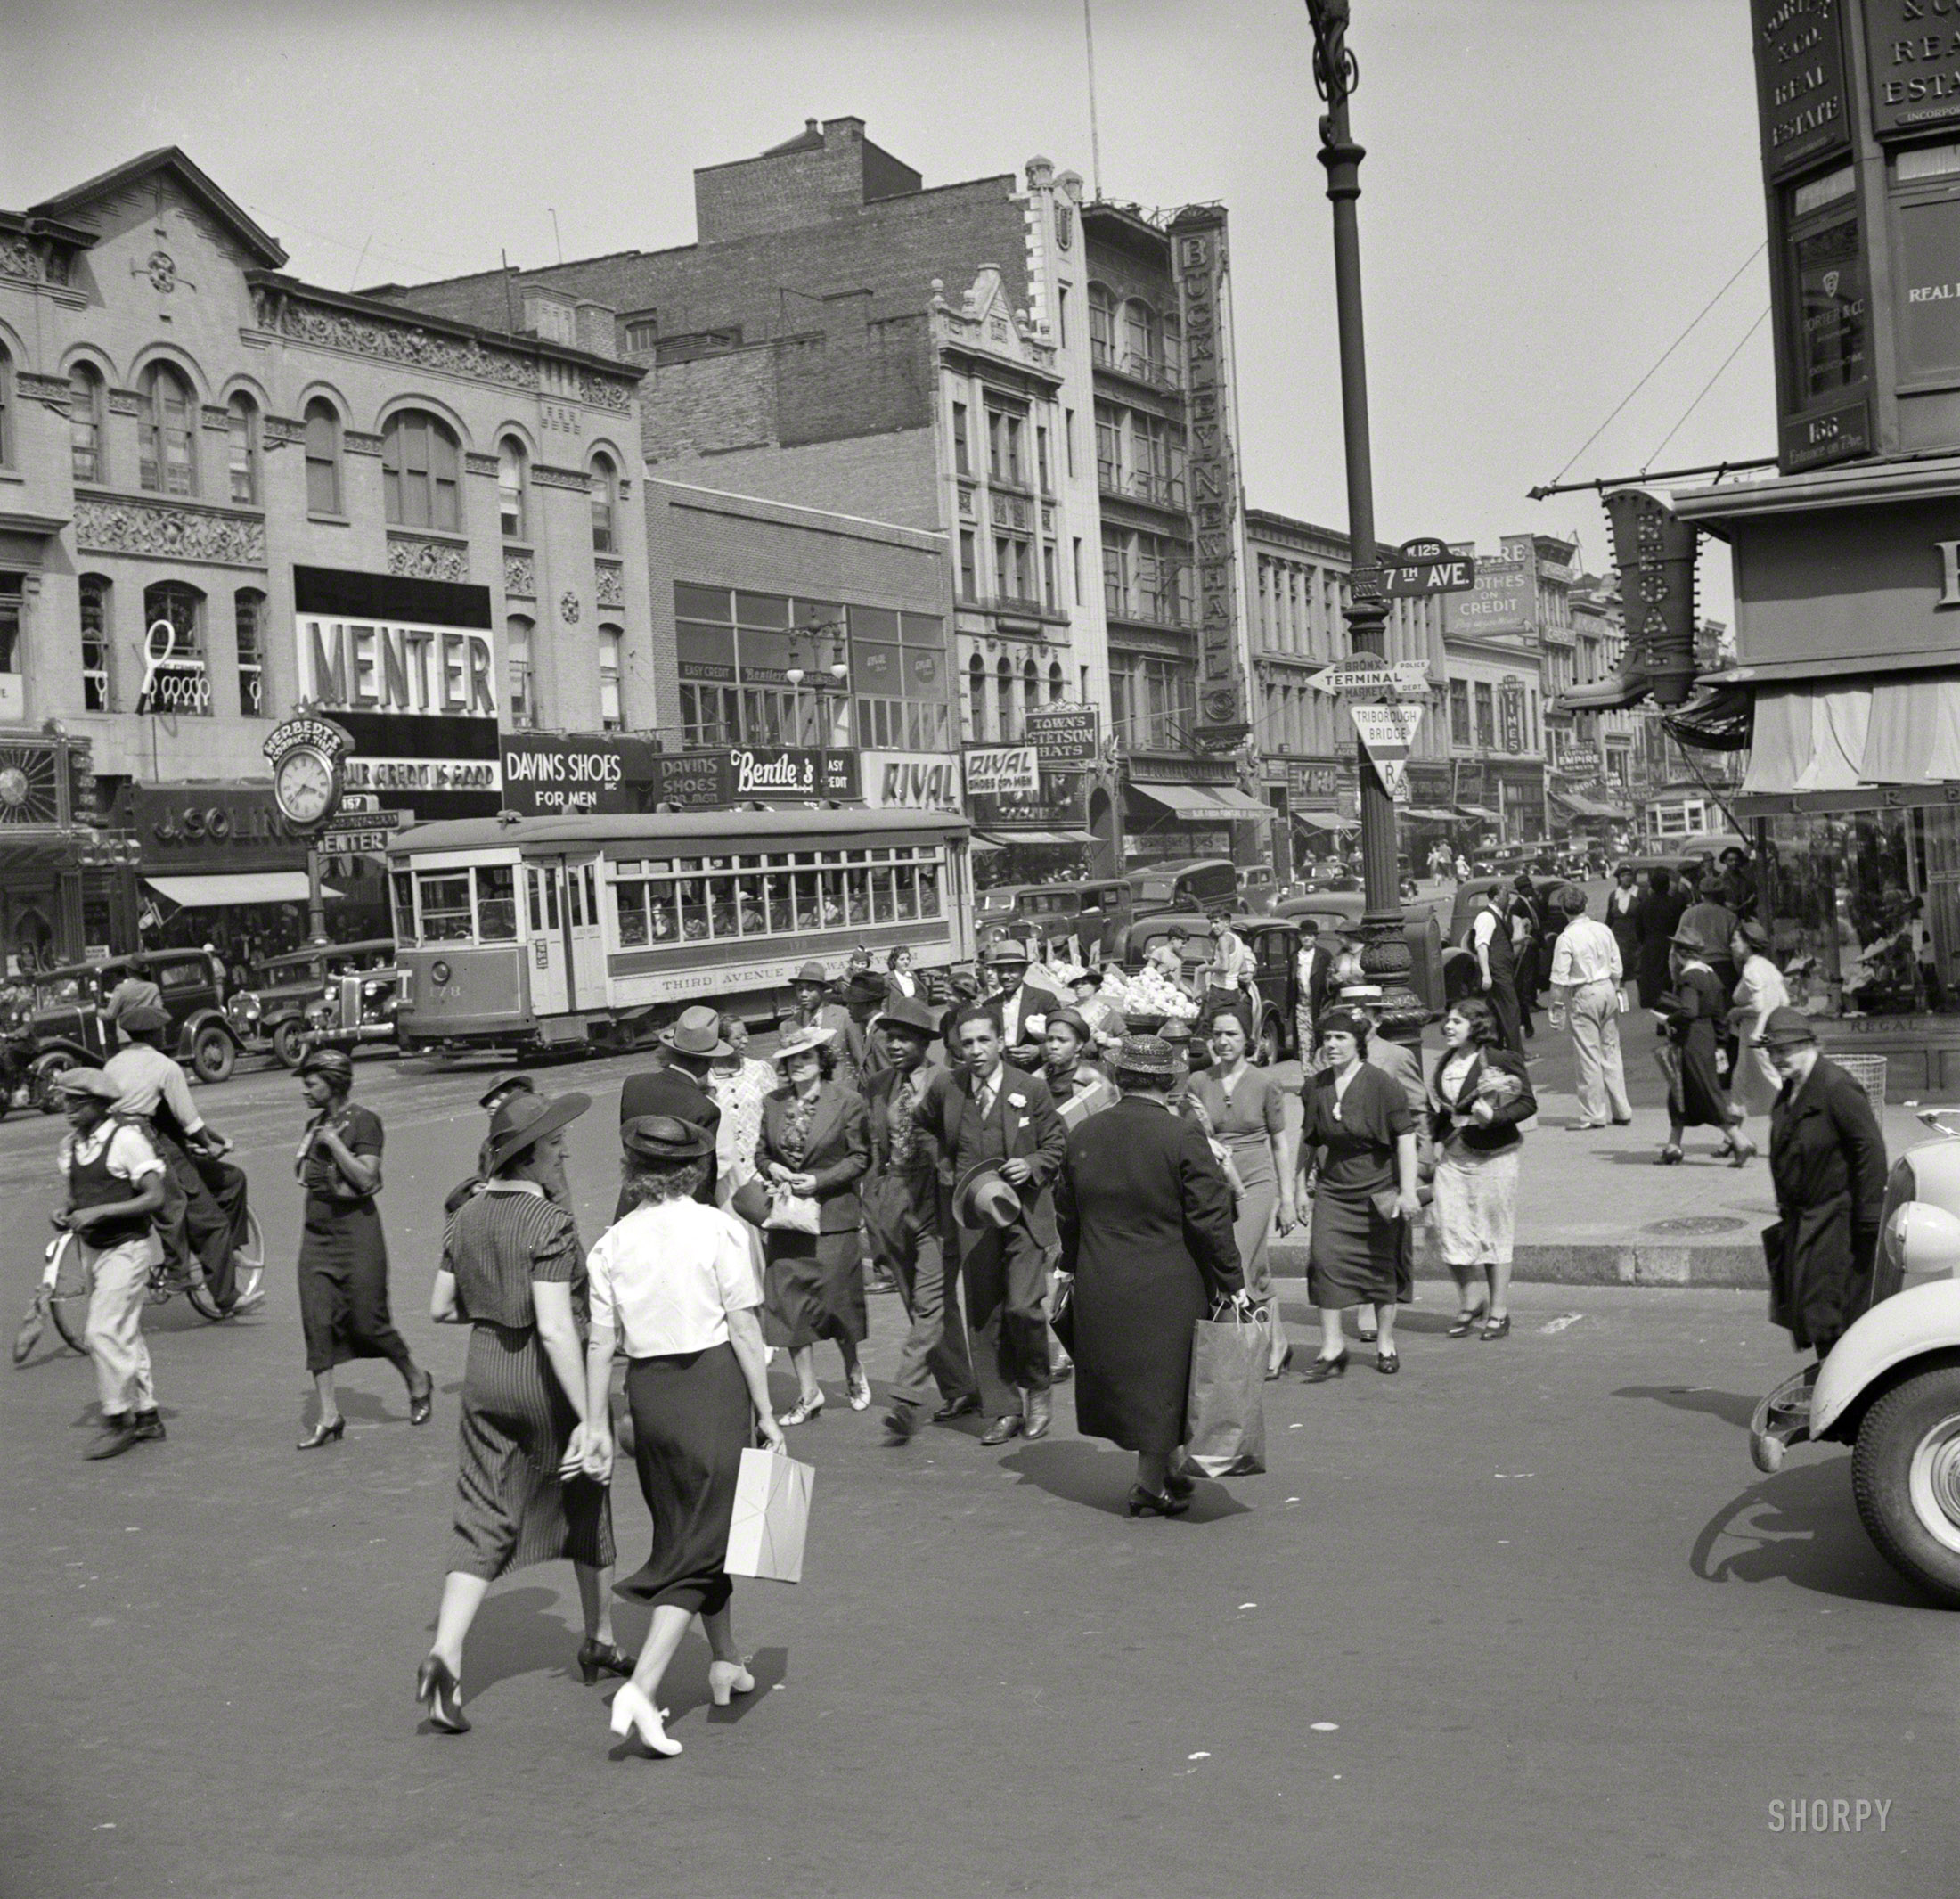 Summer 1938. "New York street scene, Seventh Avenue at West 125th." Fast-forward to 2013 and the Triborough Bridge sign would read "Robert F. Kennedy Bridge"; Seventh Avenue is now Adam Clayton Powell Jr. Boulevard; W. 125th Street is also known as Dr. Martin Luther King Jr.  Boulevard. Photo by Jack Allison for the Resettlement Administration. View full size.